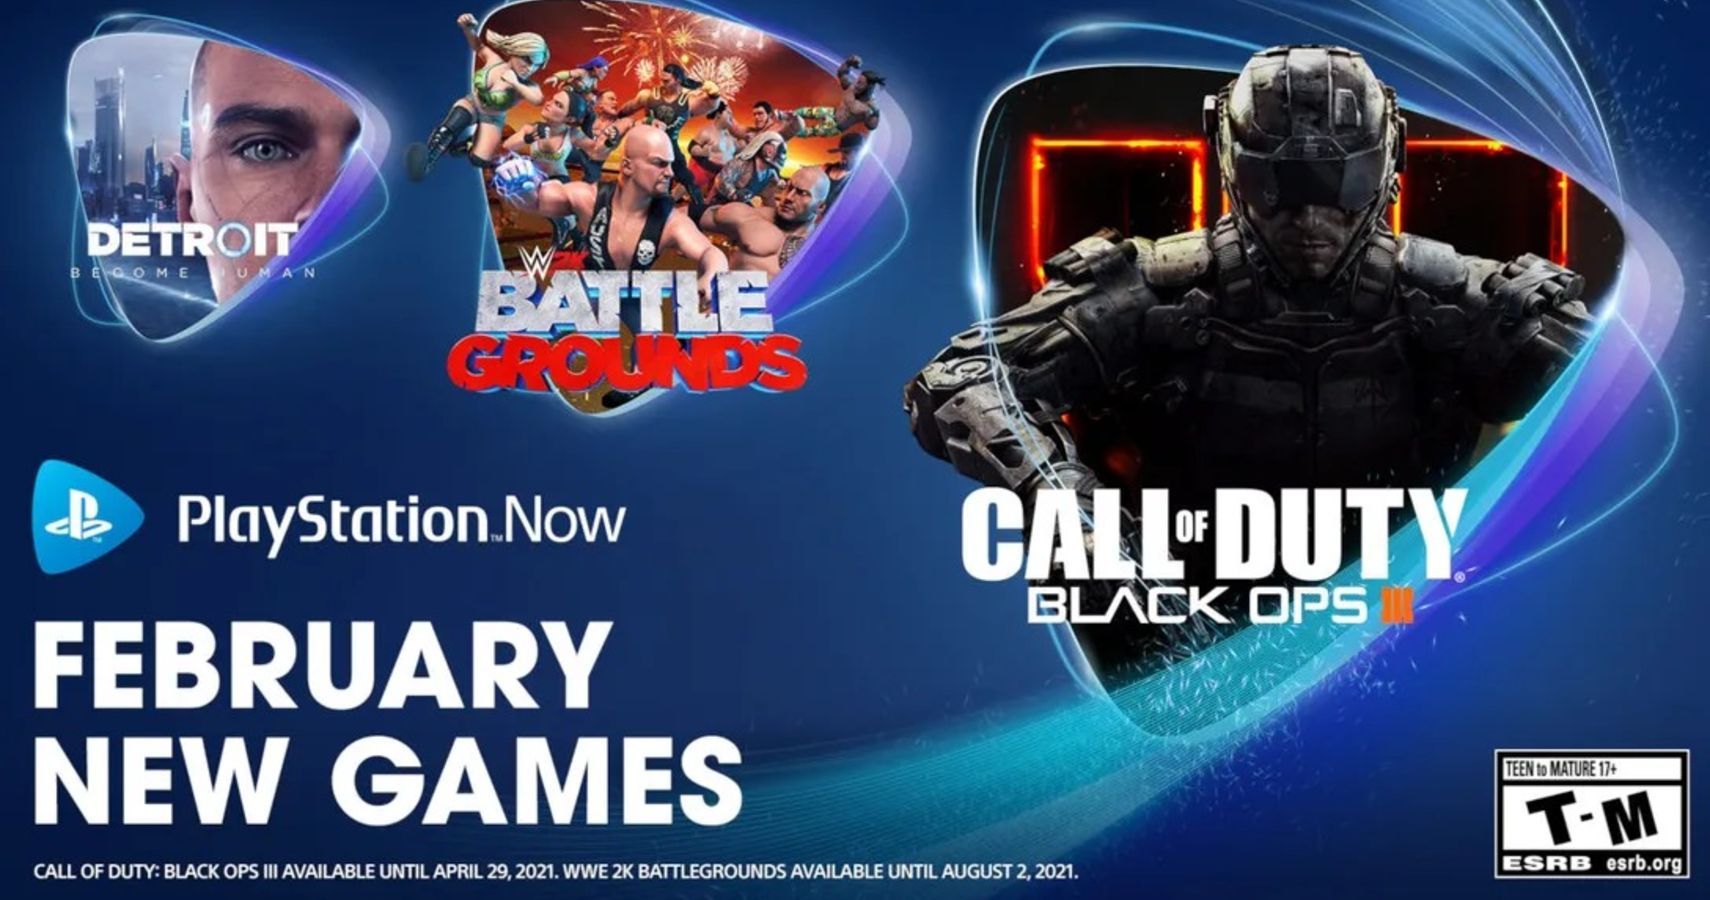 PS Now Games February 2021 Include Black Ops 3 And Detroit: Become Human